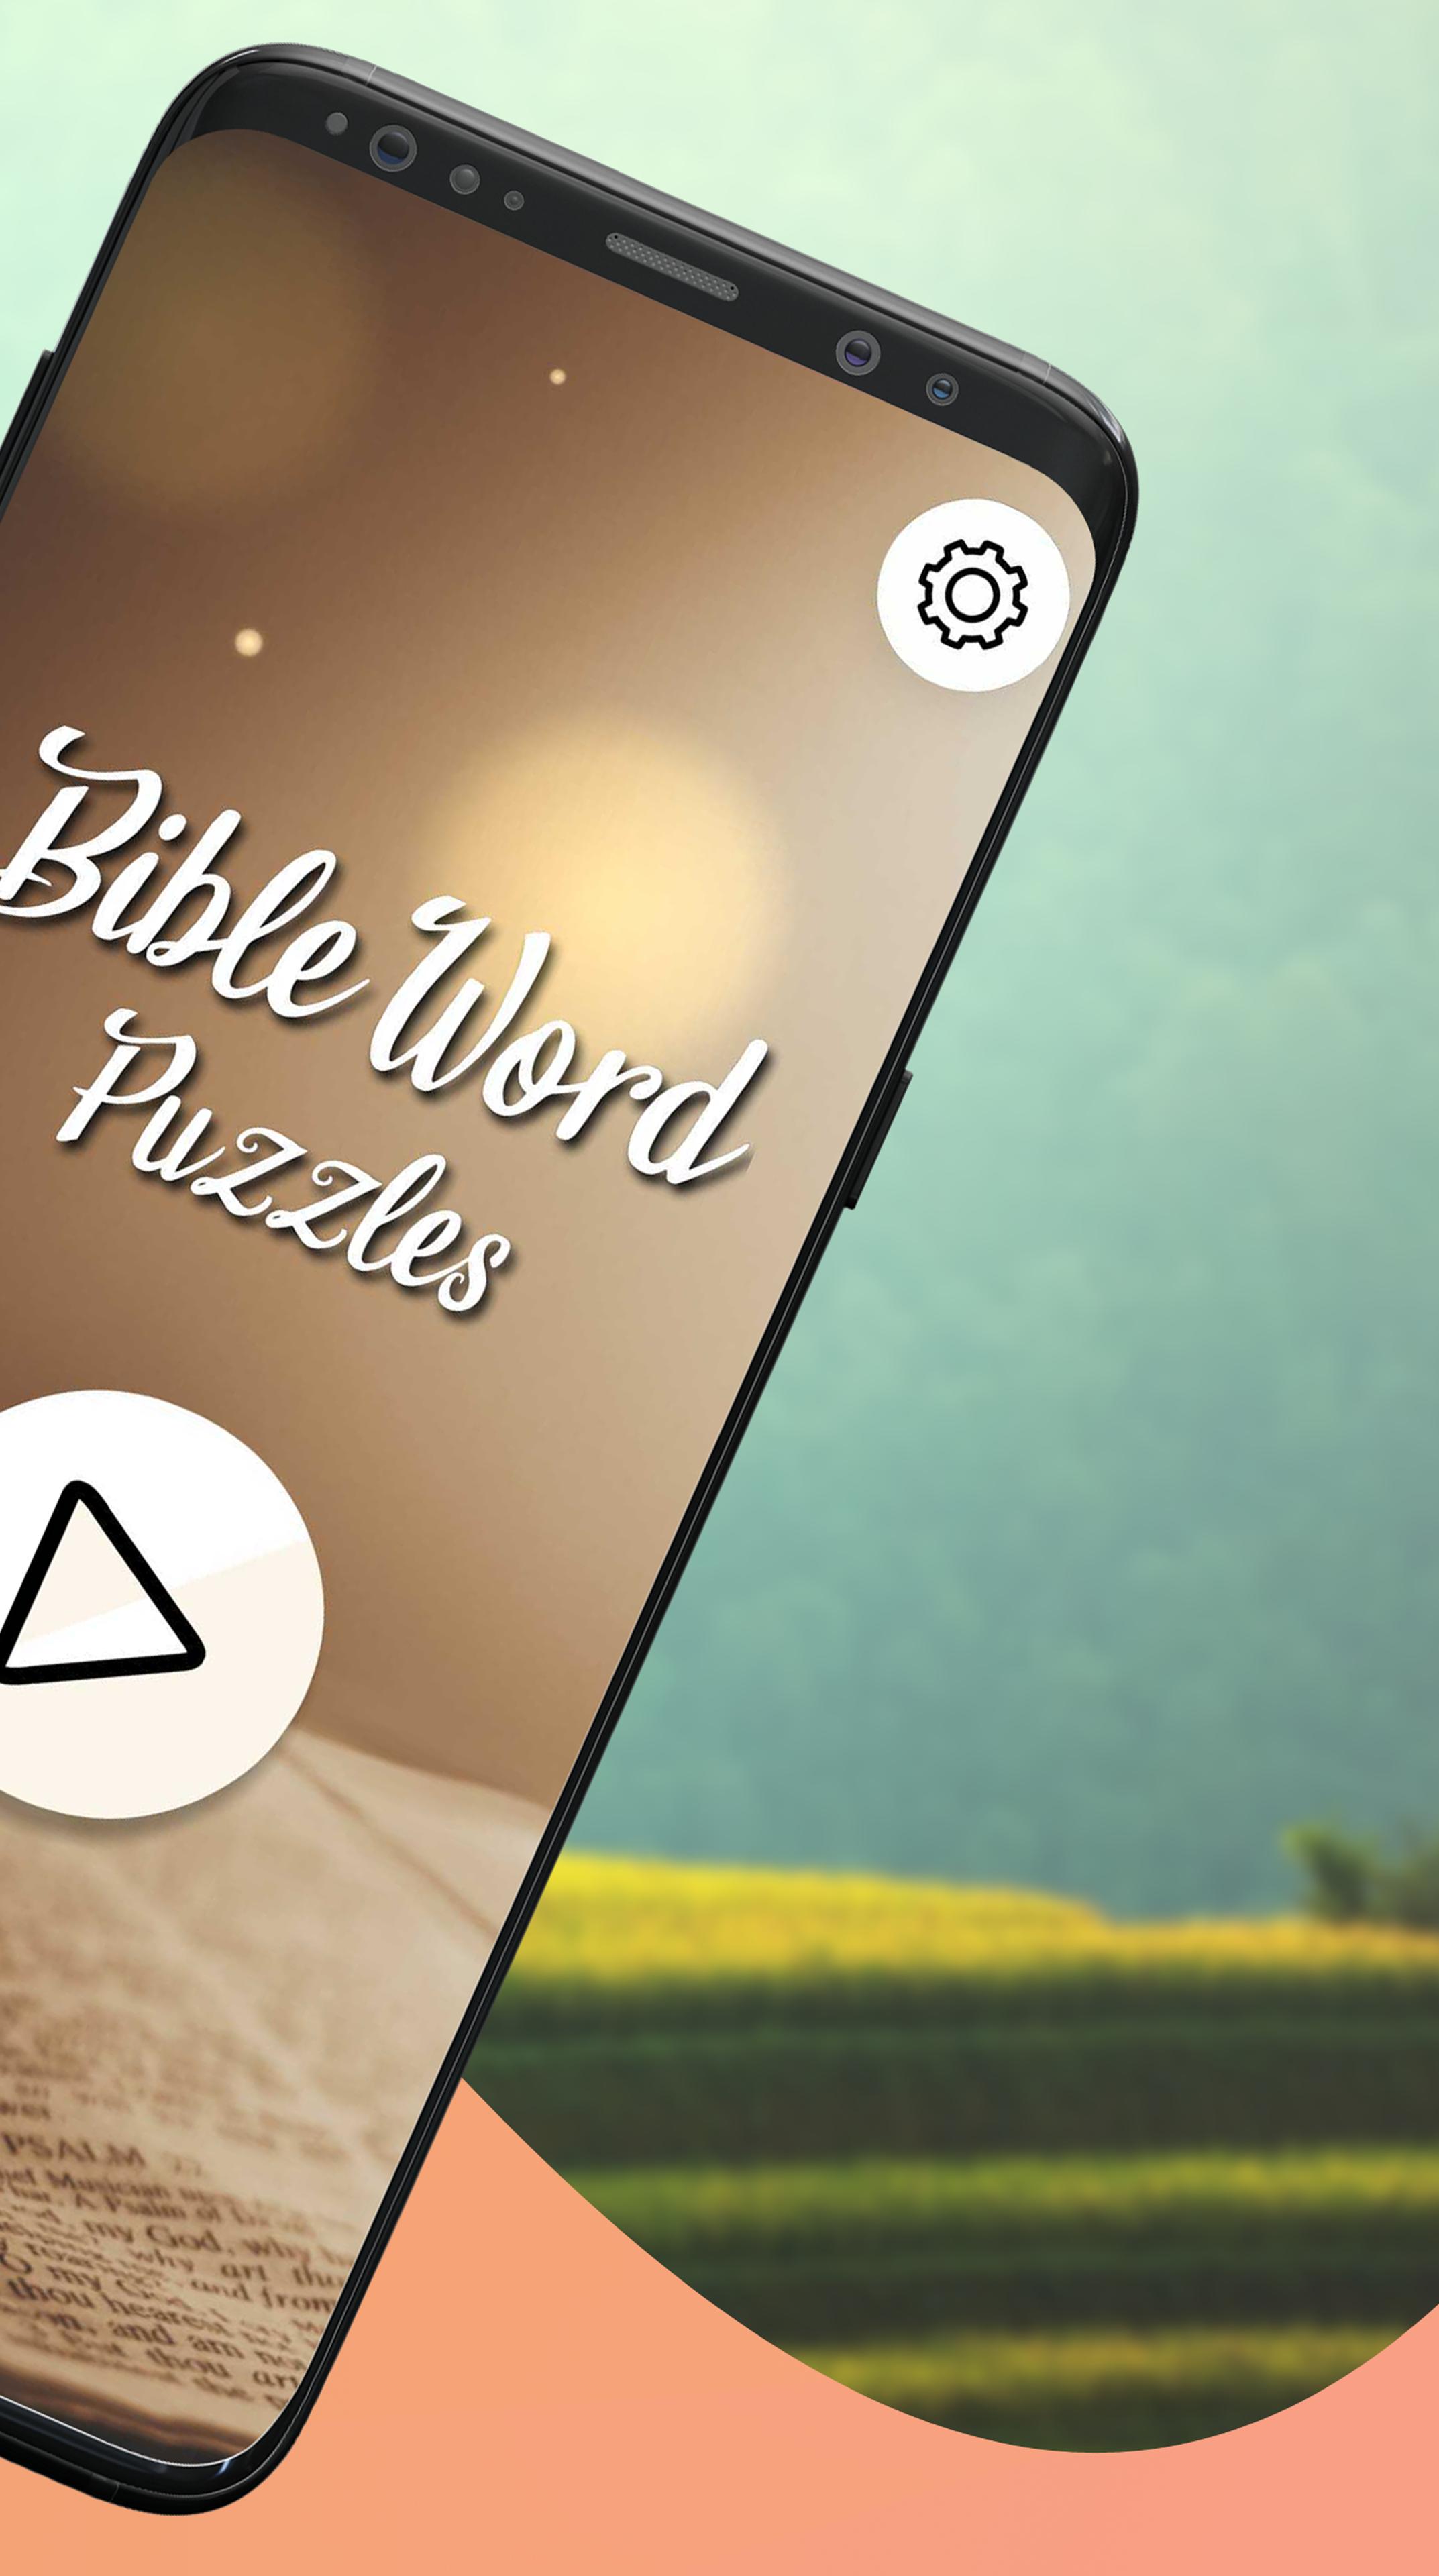 Bible Word Puzzle Games: Verse Search & Cross Word 4.5 Screenshot 6